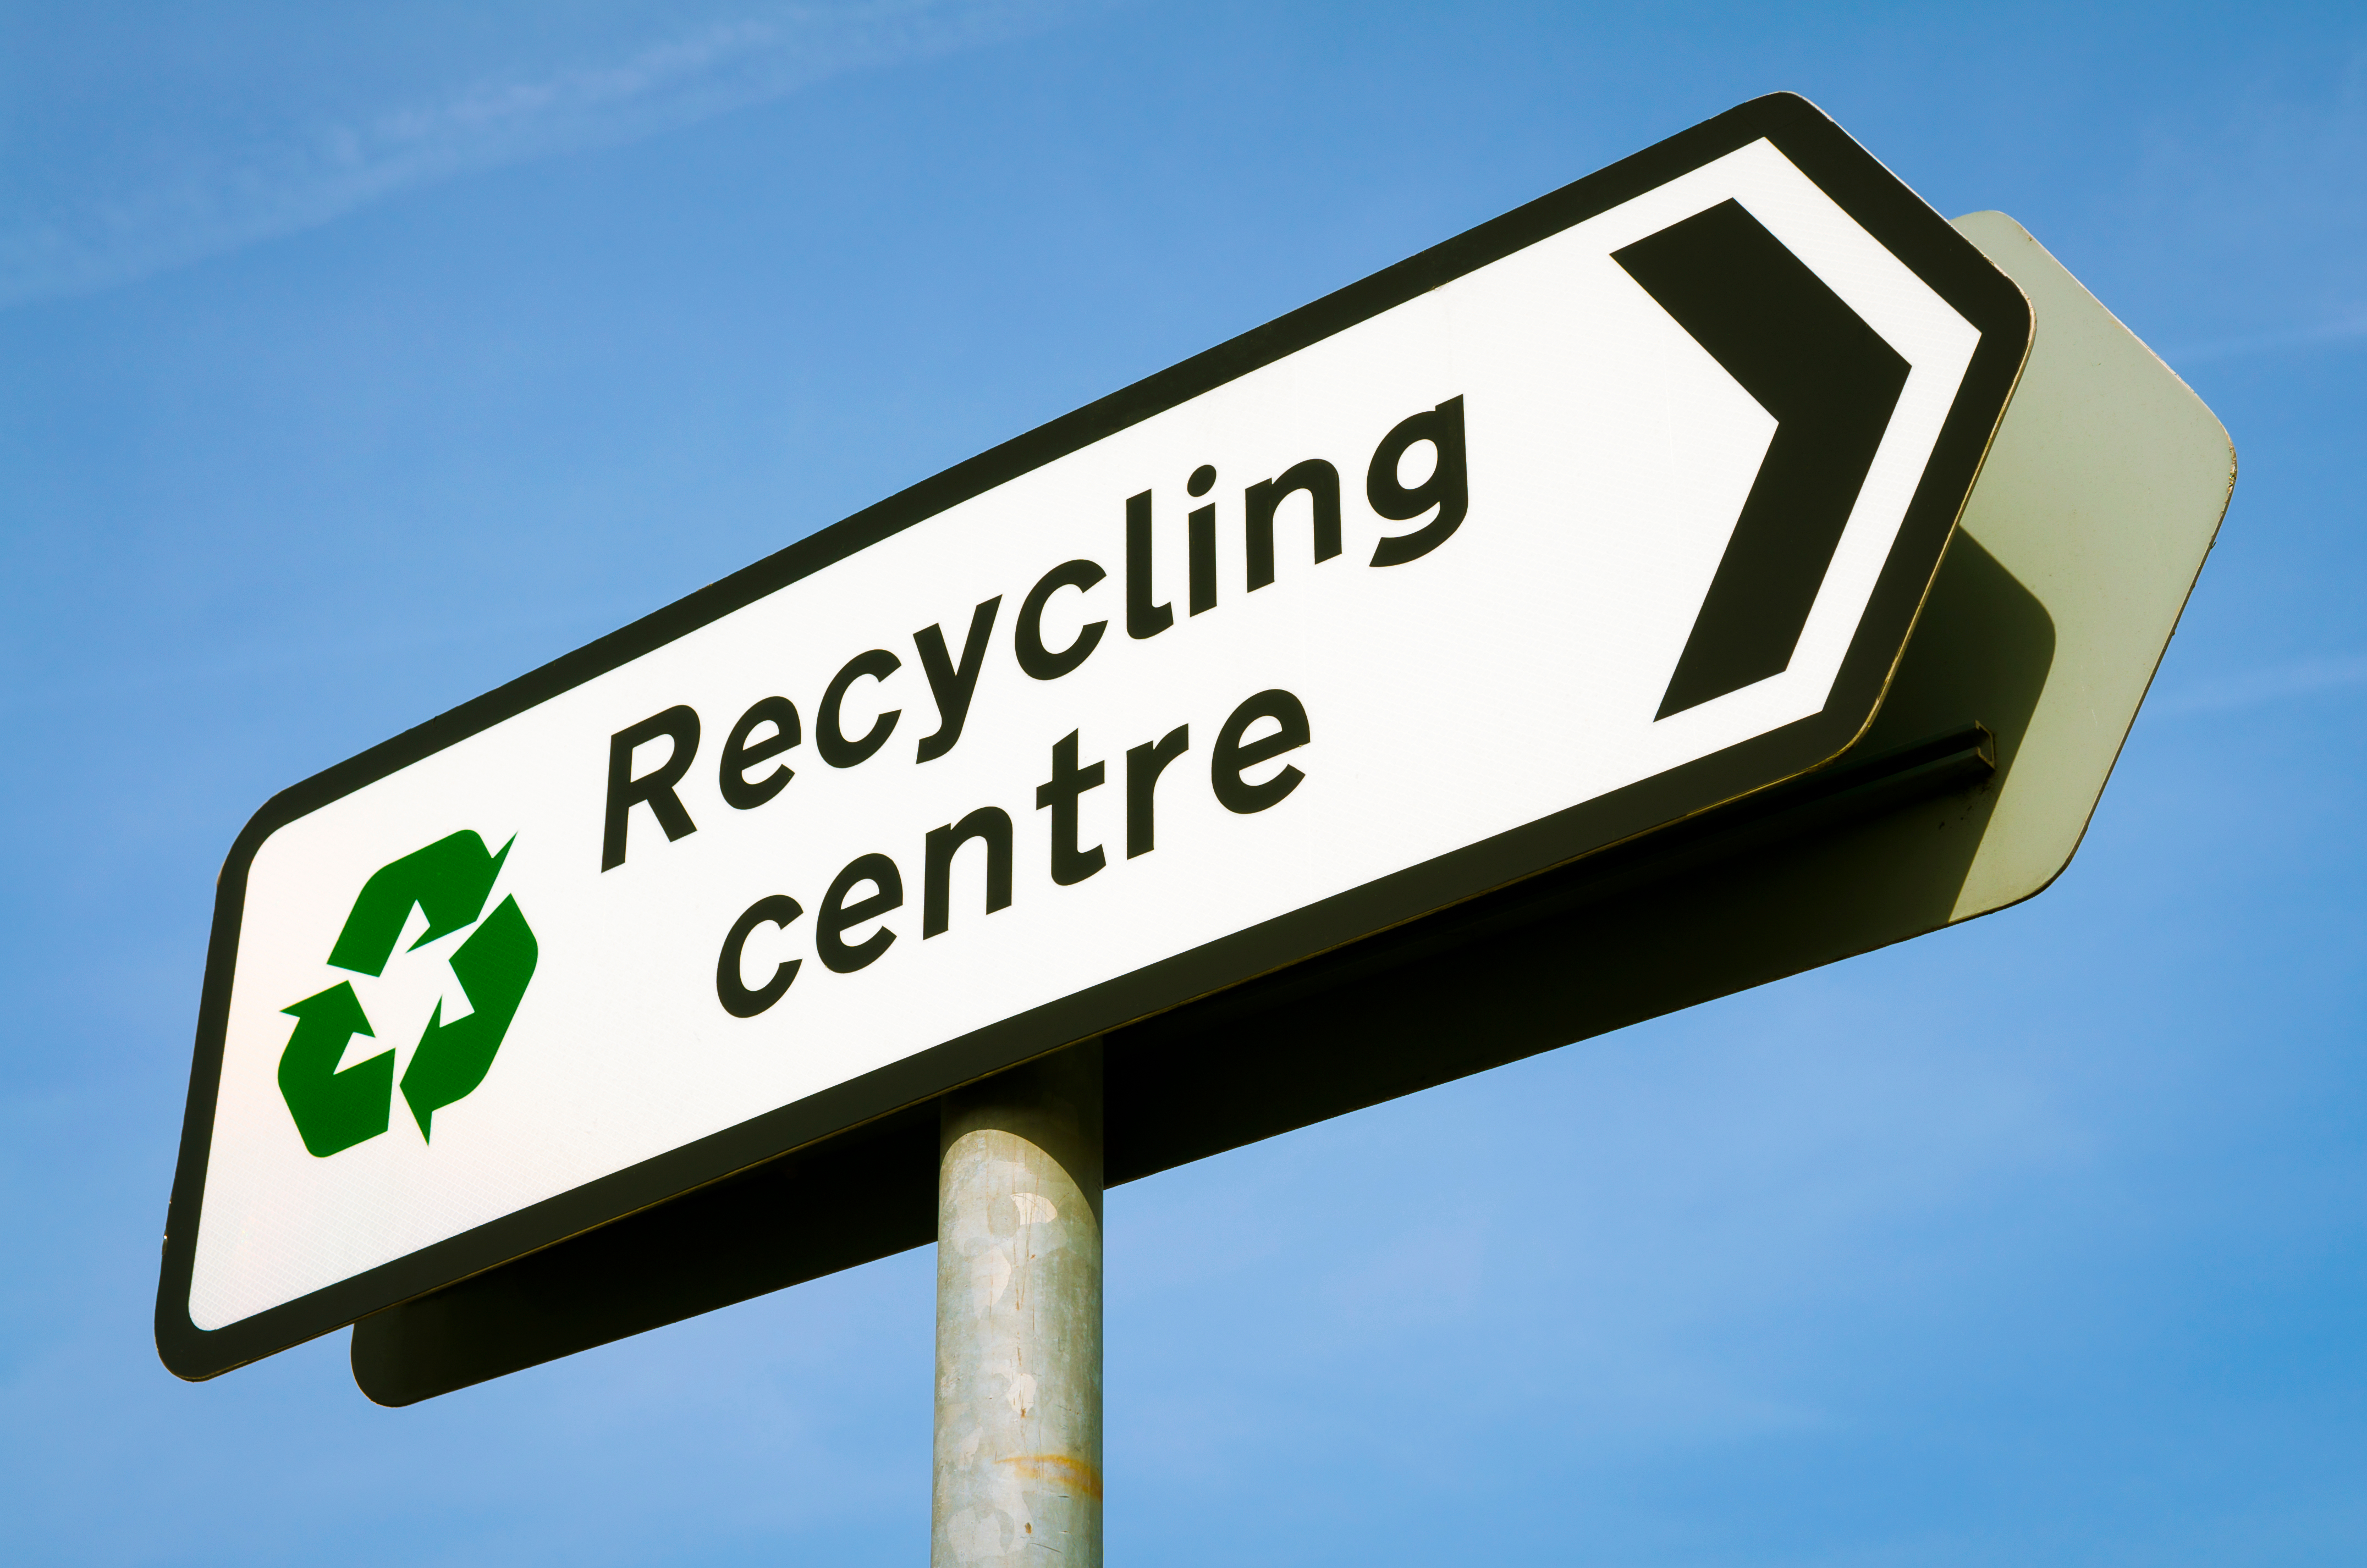 Contact your local council to see if they offer a recycling service